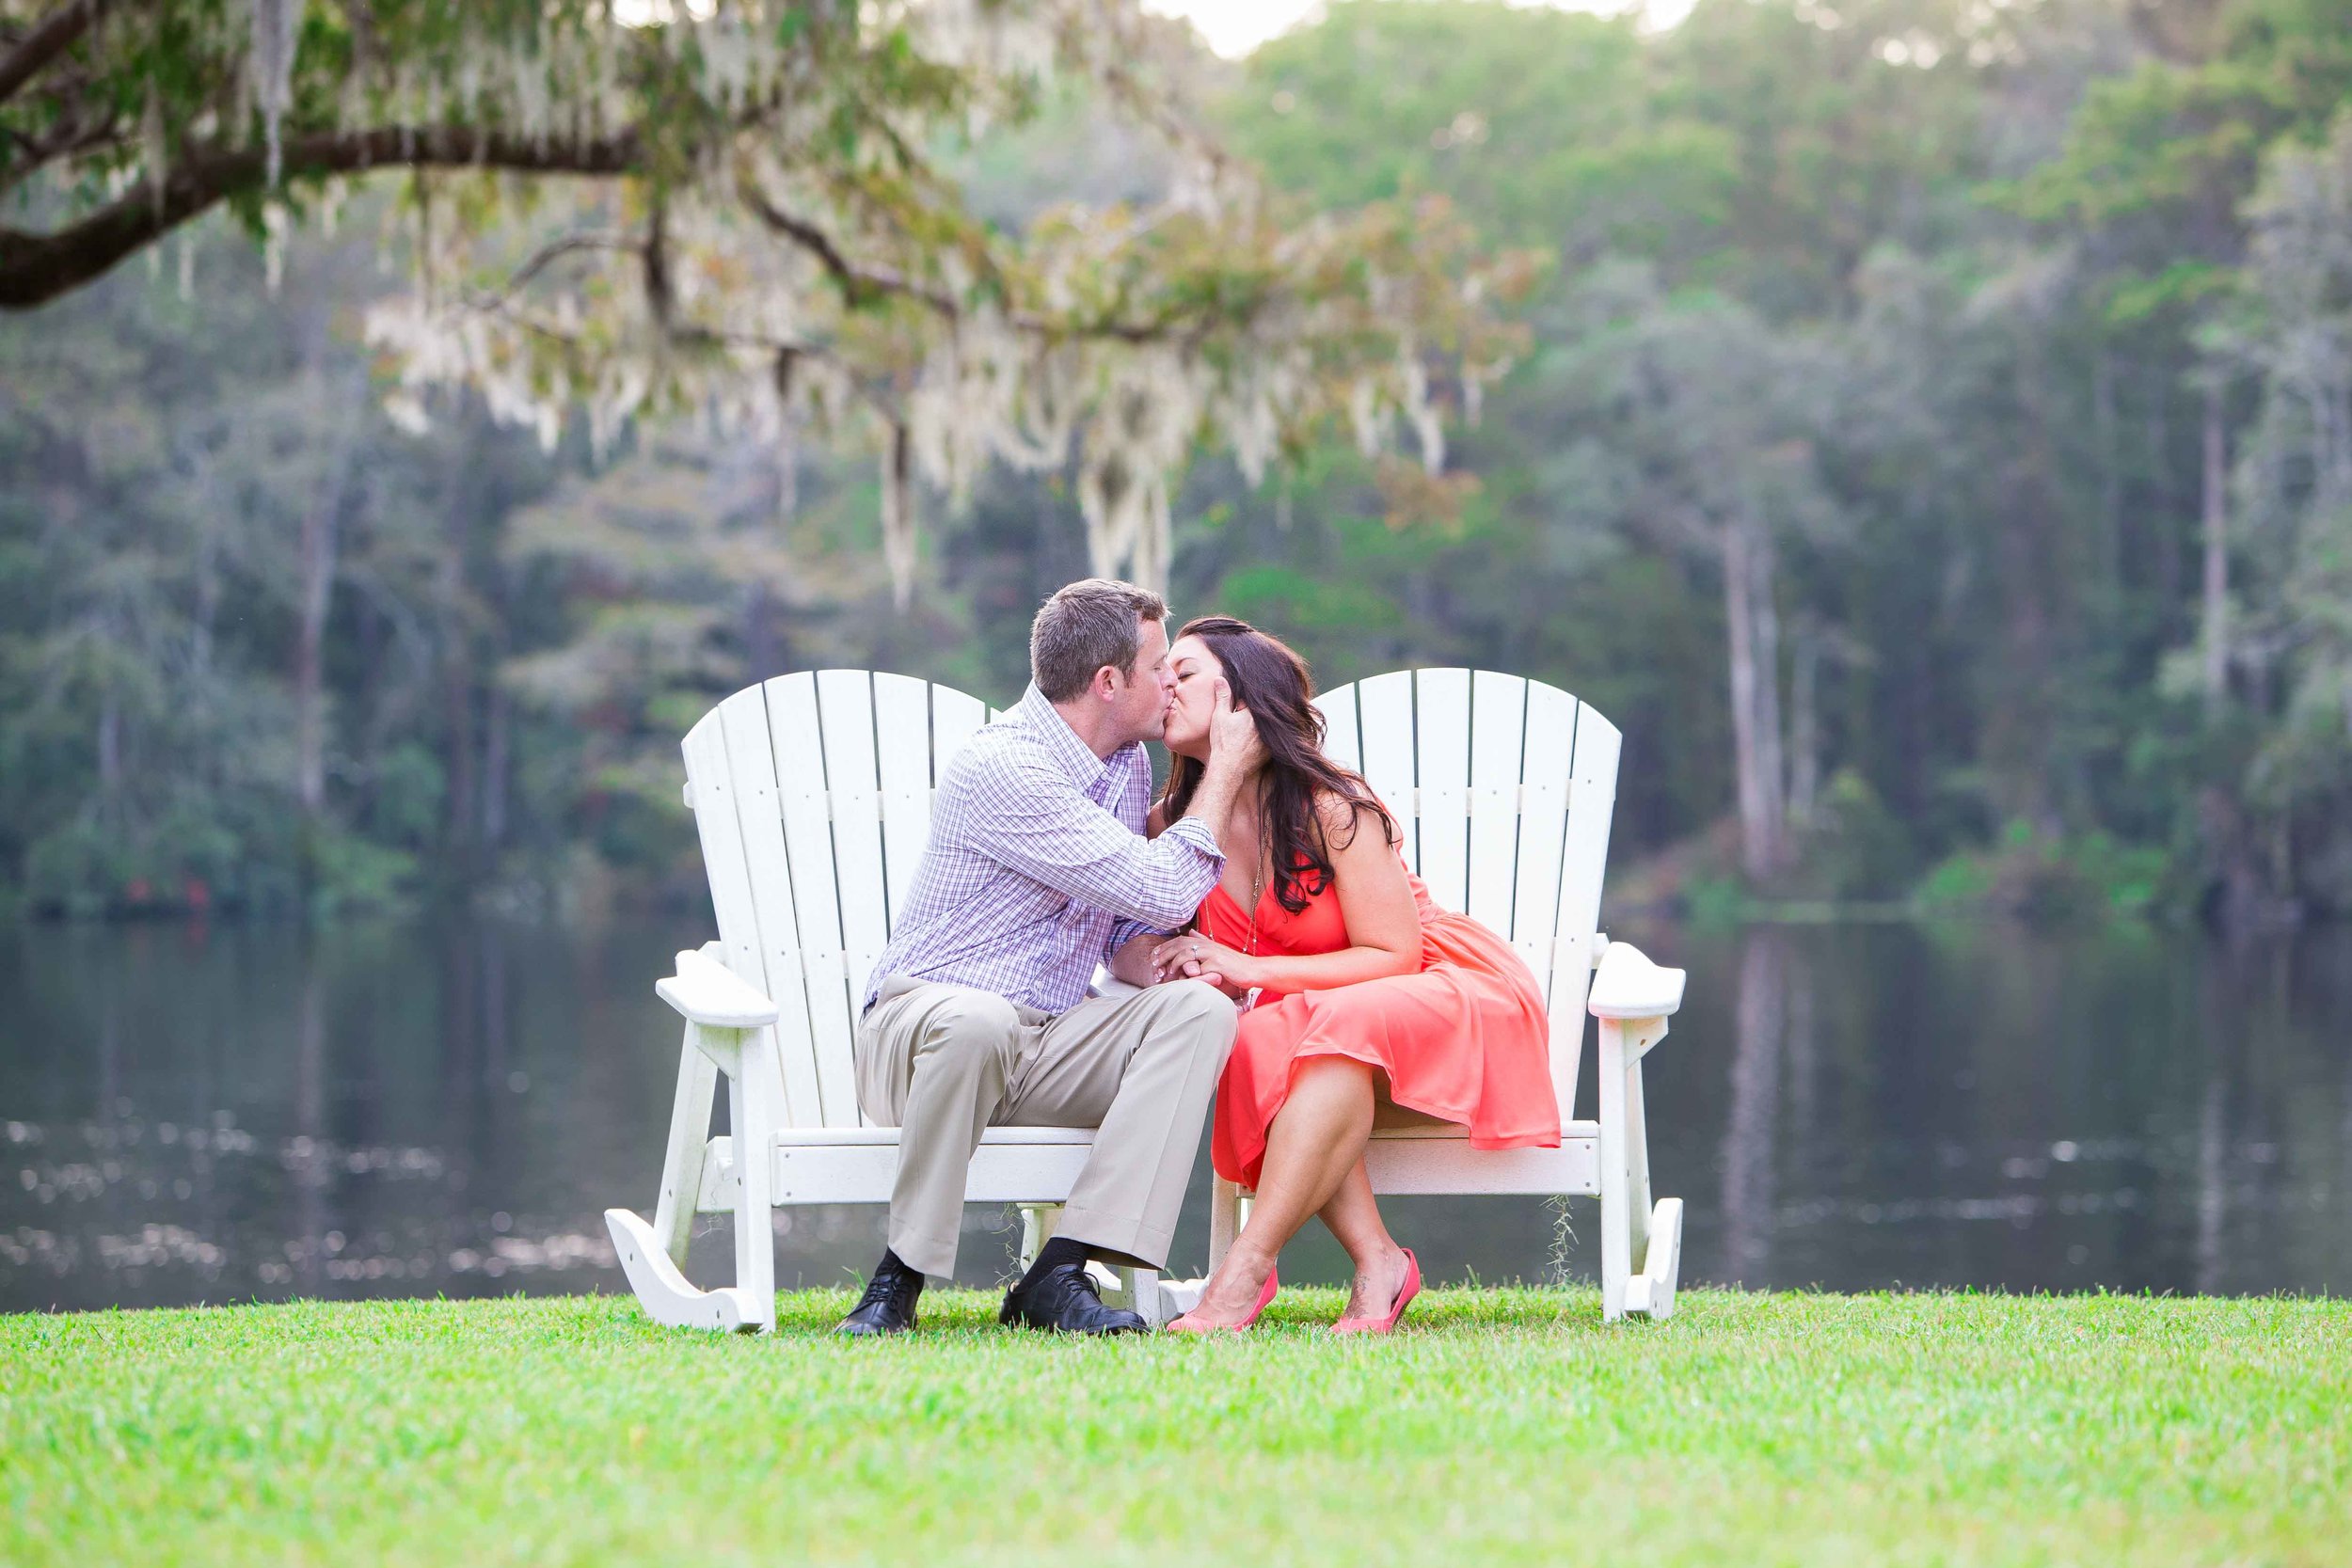 Myrtle beach engagement pictures ramona nicolae photography engagement photos-3.jpg